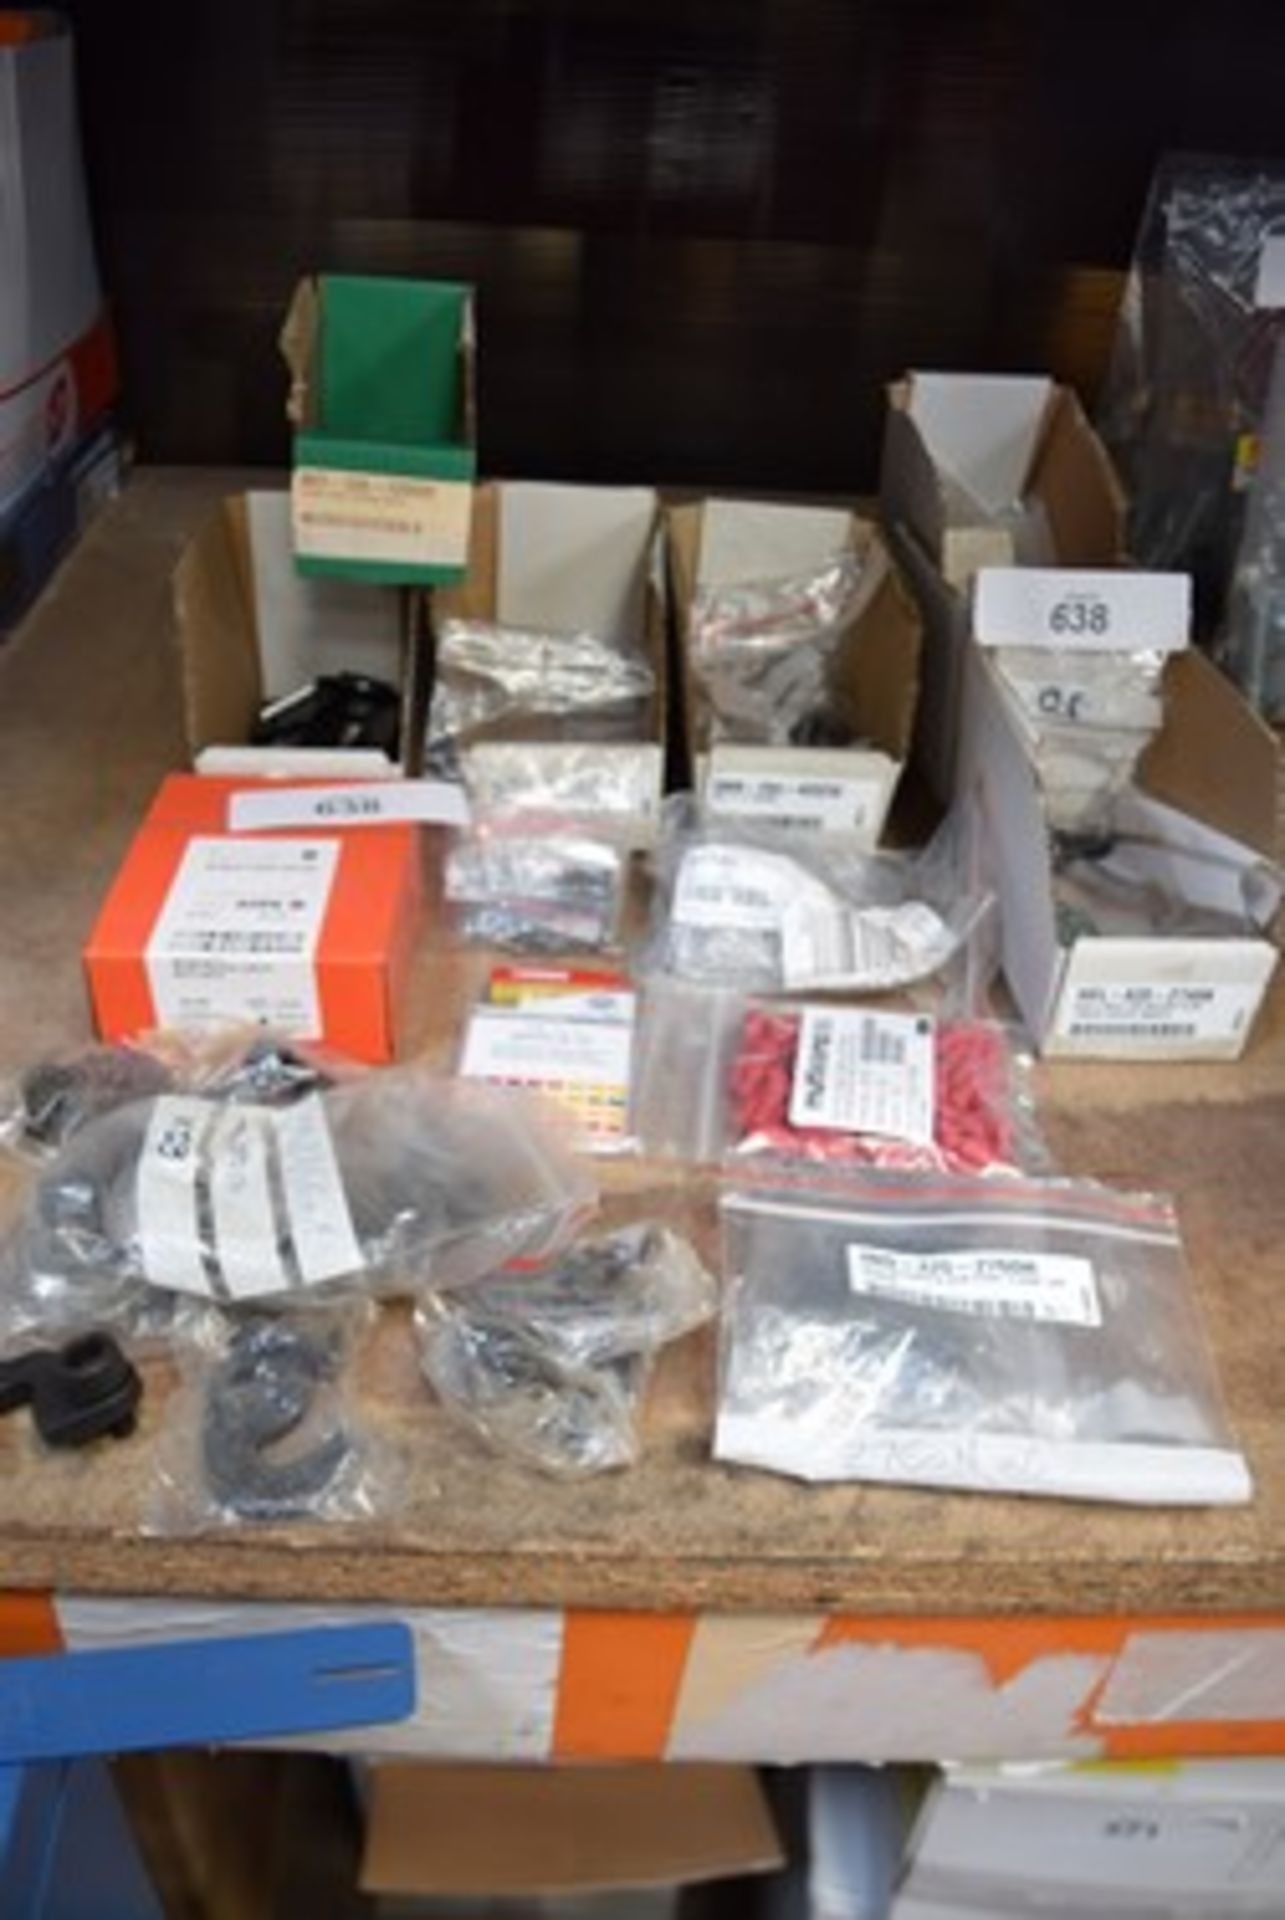 A collection of assorted small parts, all with Cromwell catalogue No's, items - small screws,